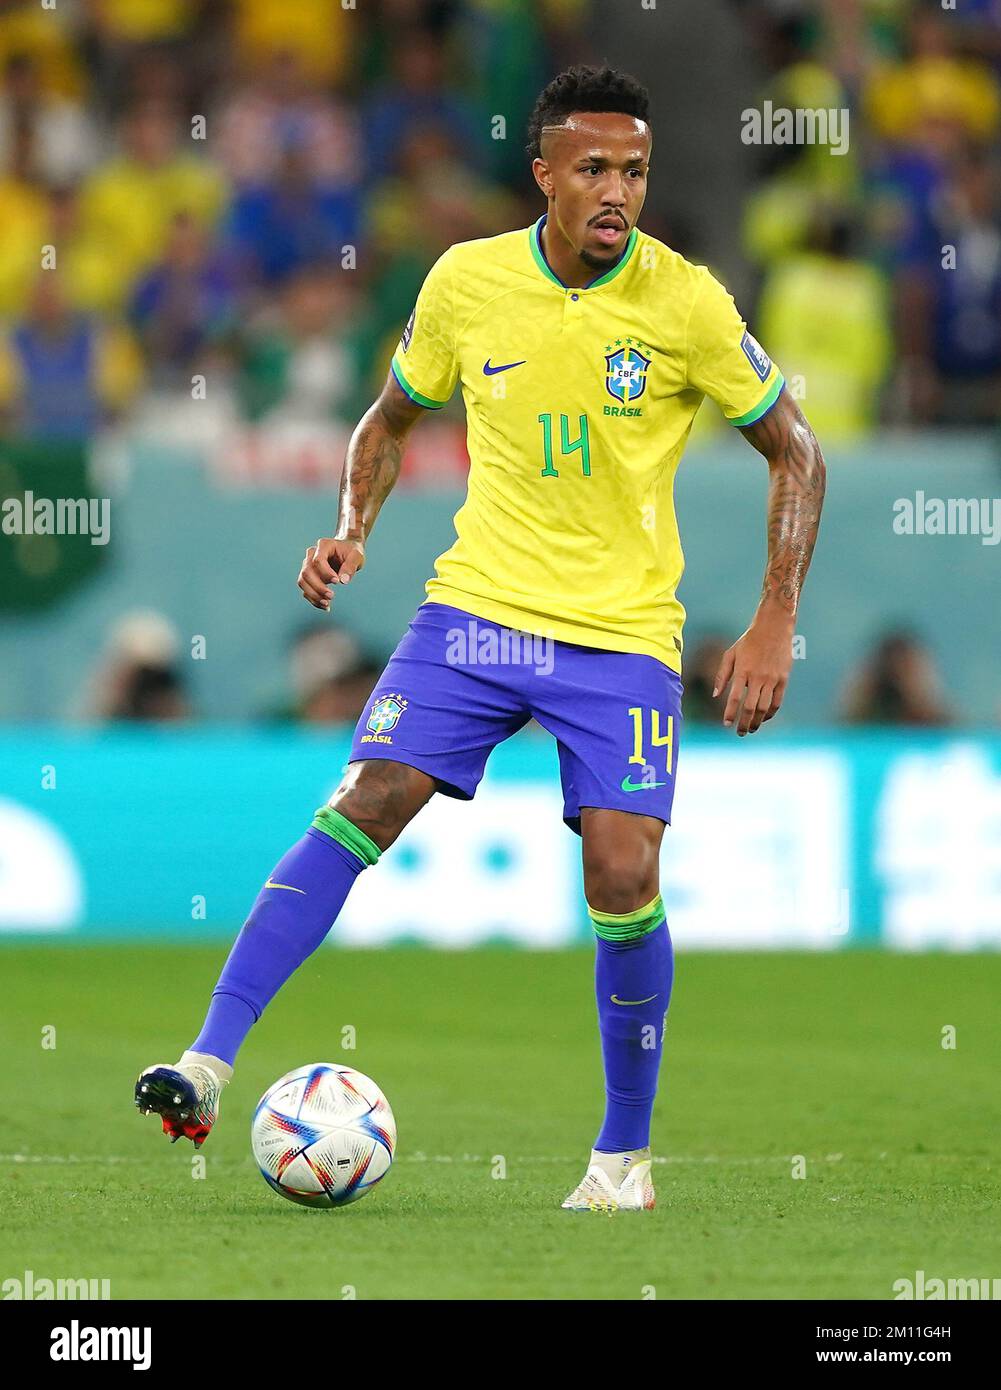 Brazils Eder Militao in action during the FIFA World Cup Quarter-Final match at the Education City Stadium in Al Rayyan, Qatar